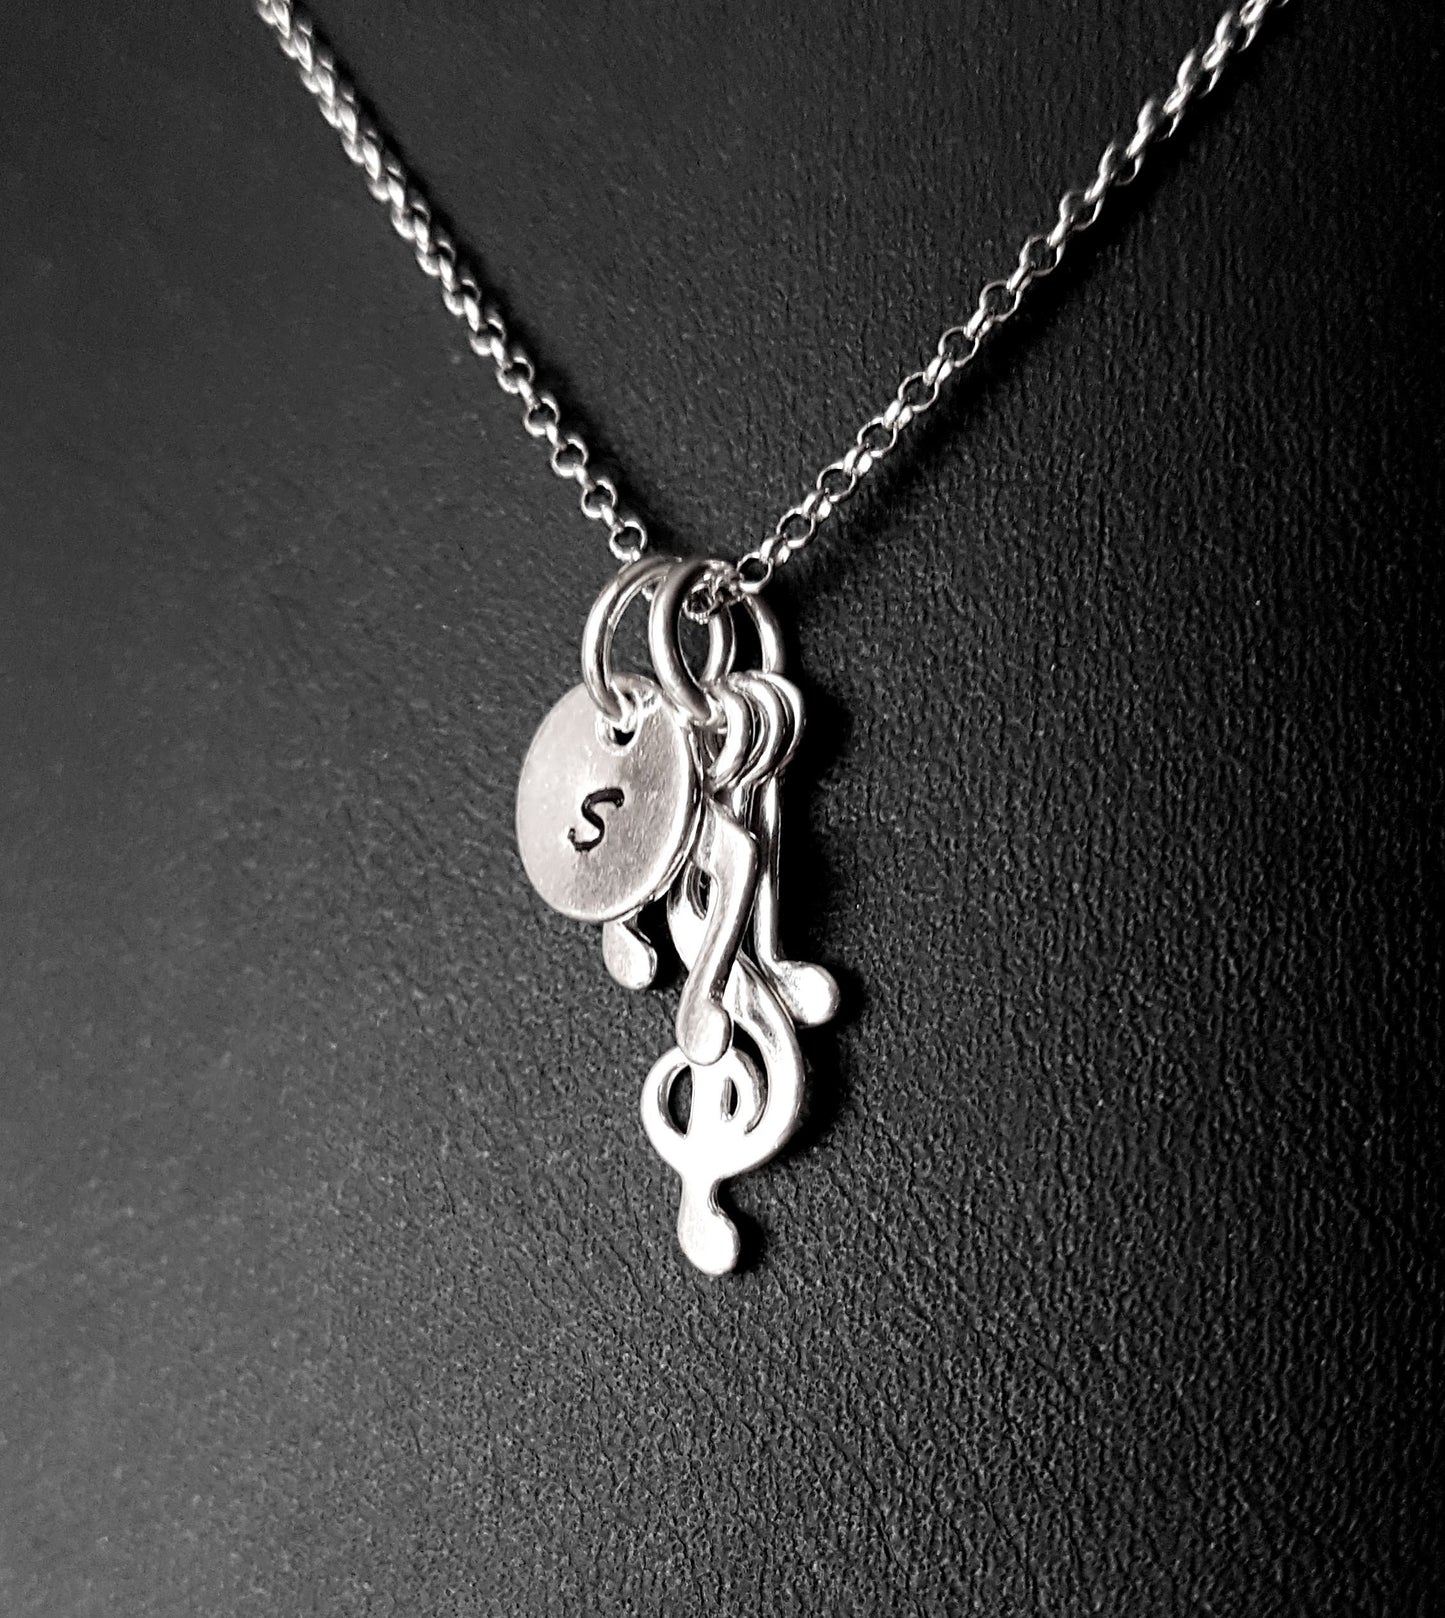 Personalized Musical Necklace, Music Symbols, Initial Pendant, Sterling Silver